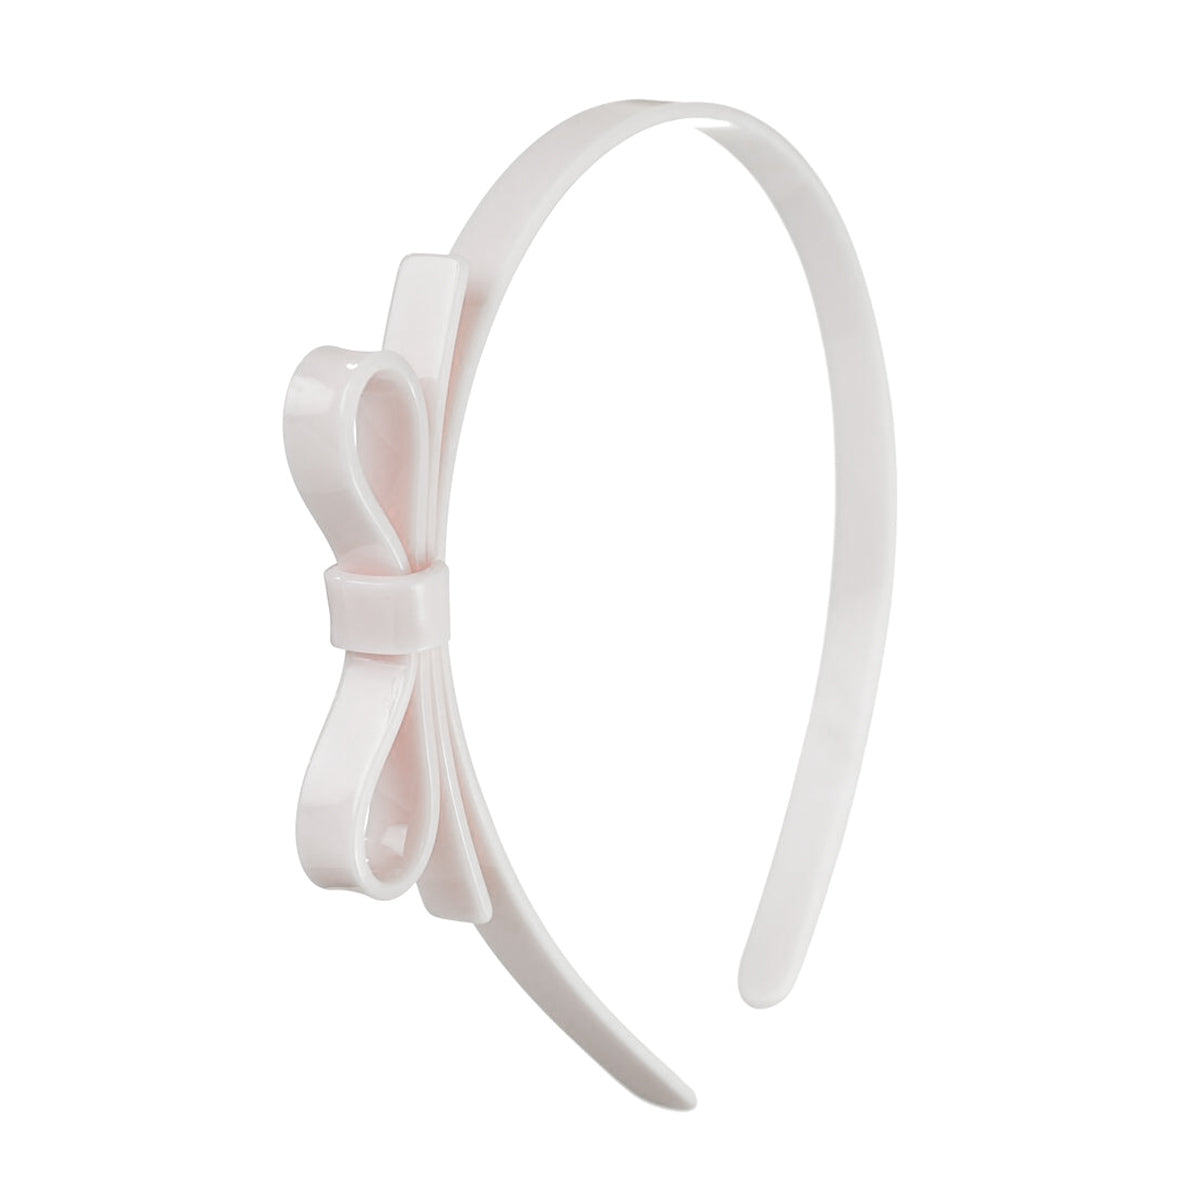 Pearl White Narrow Hair Bow Little Girl's Headband by Lilies & Roses